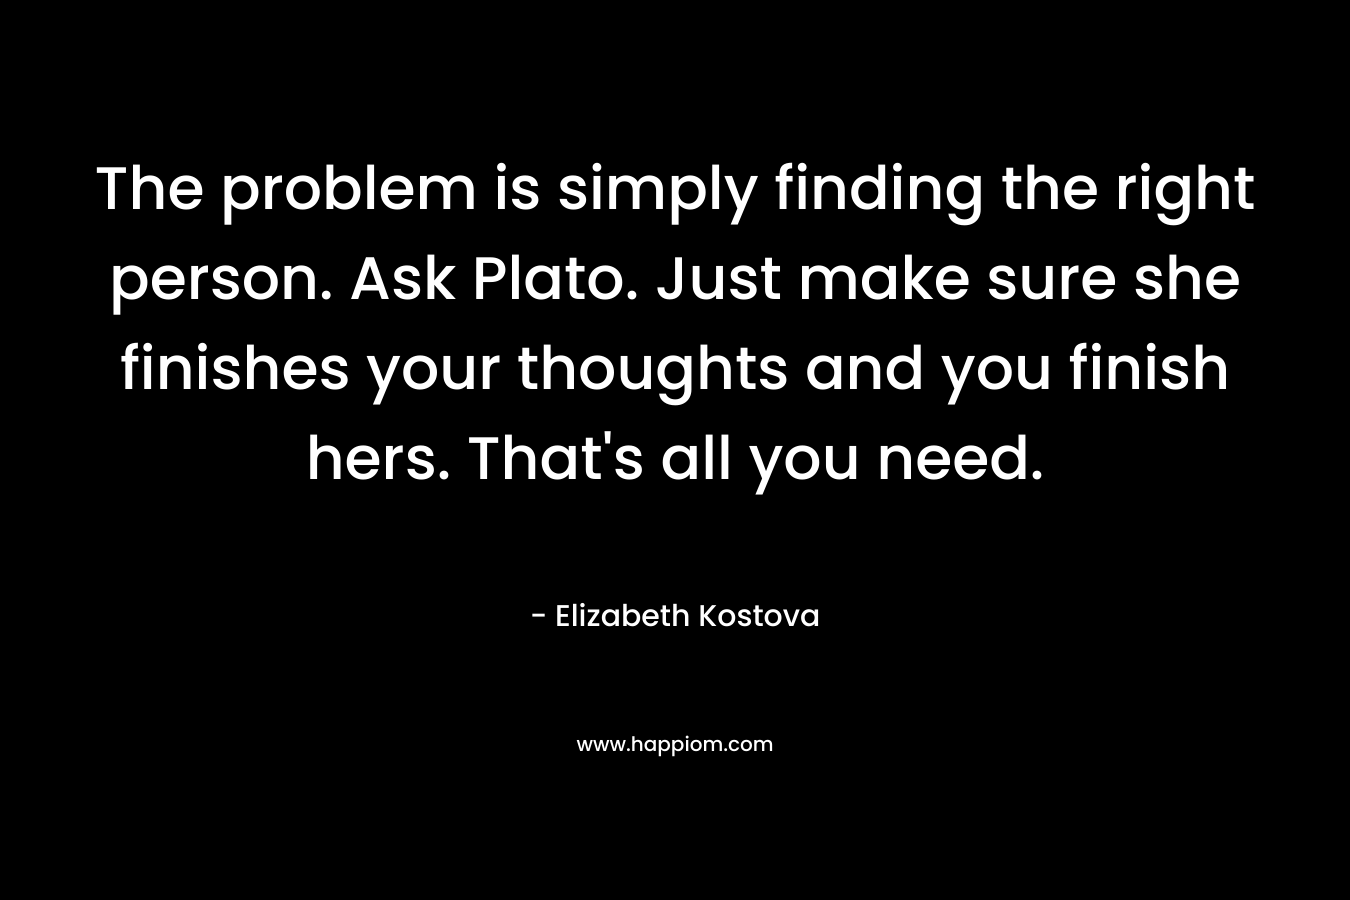 The problem is simply finding the right person. Ask Plato. Just make sure she finishes your thoughts and you finish hers. That’s all you need. – Elizabeth Kostova